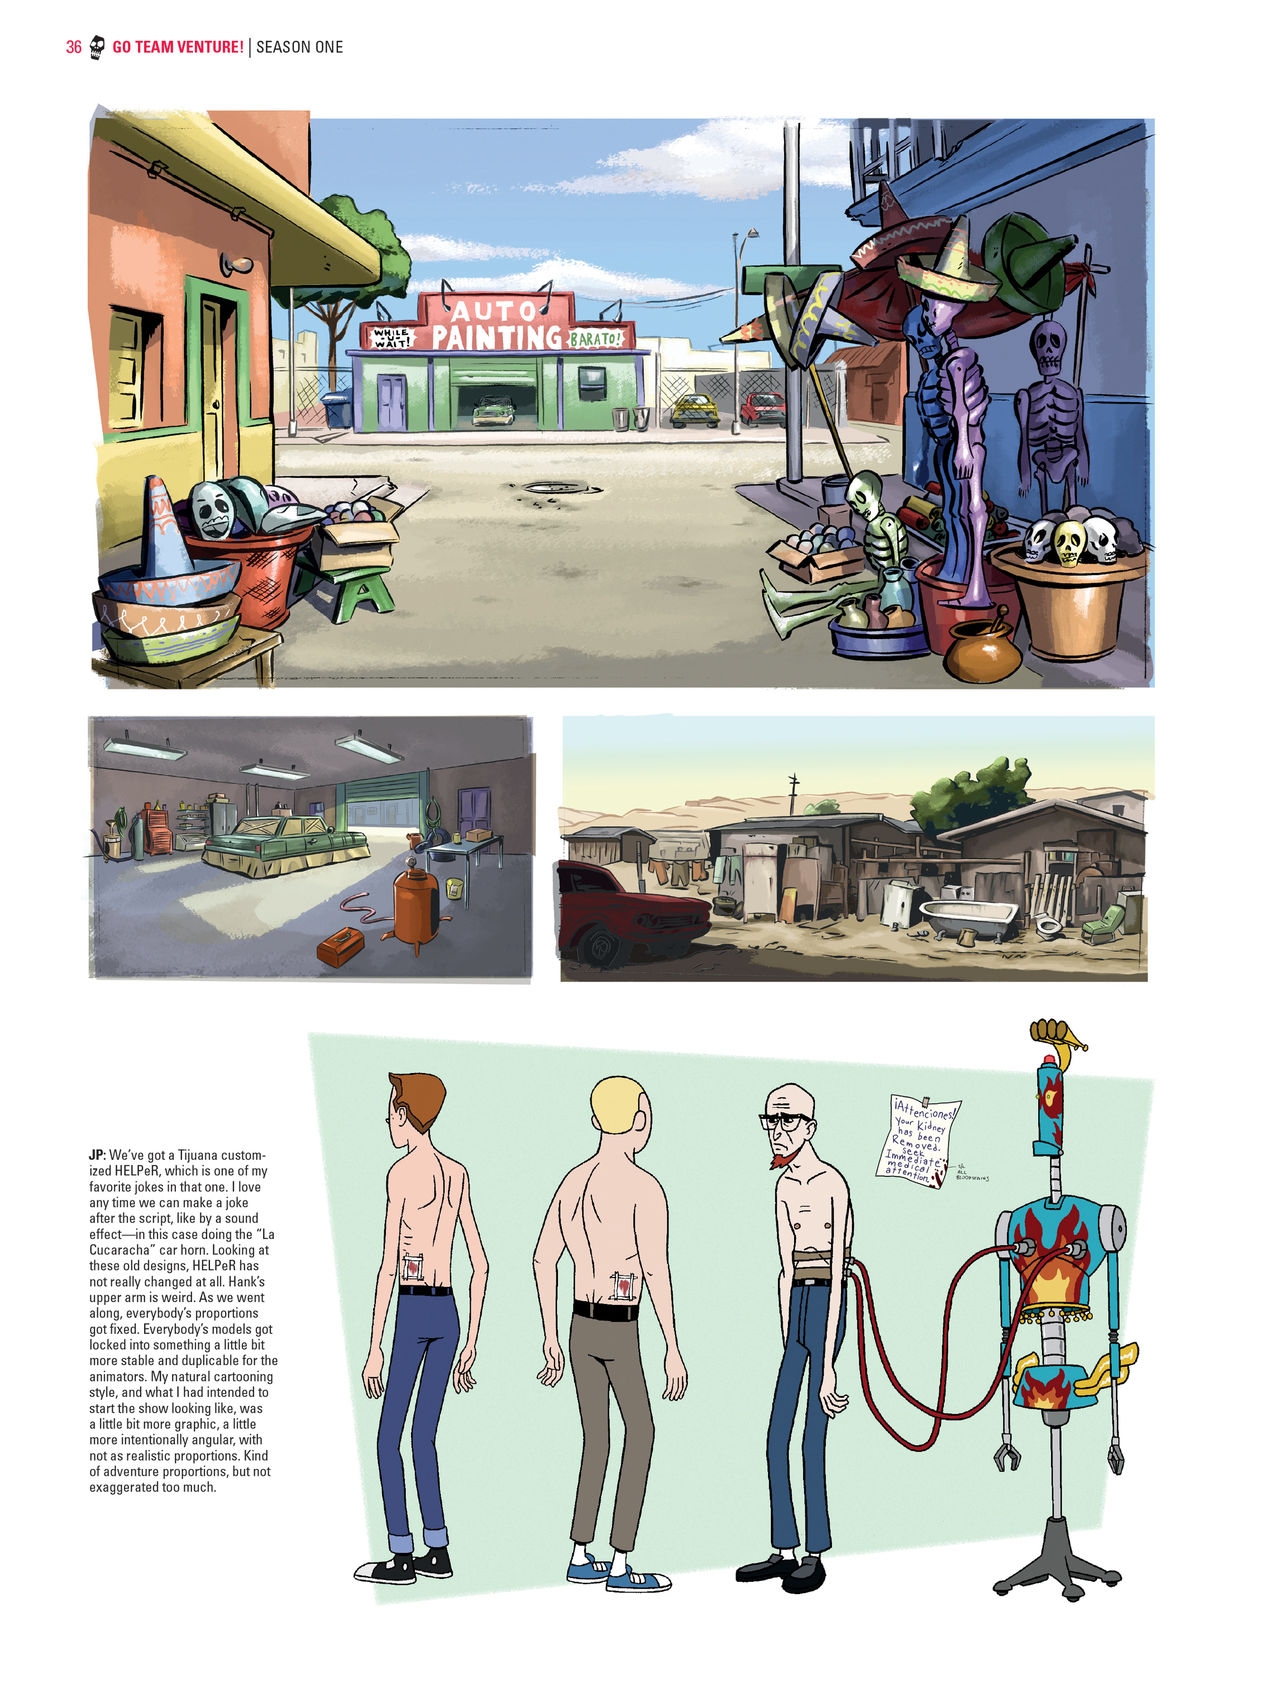 Go Team Venture! - The Art and Making of the Venture Bros 35